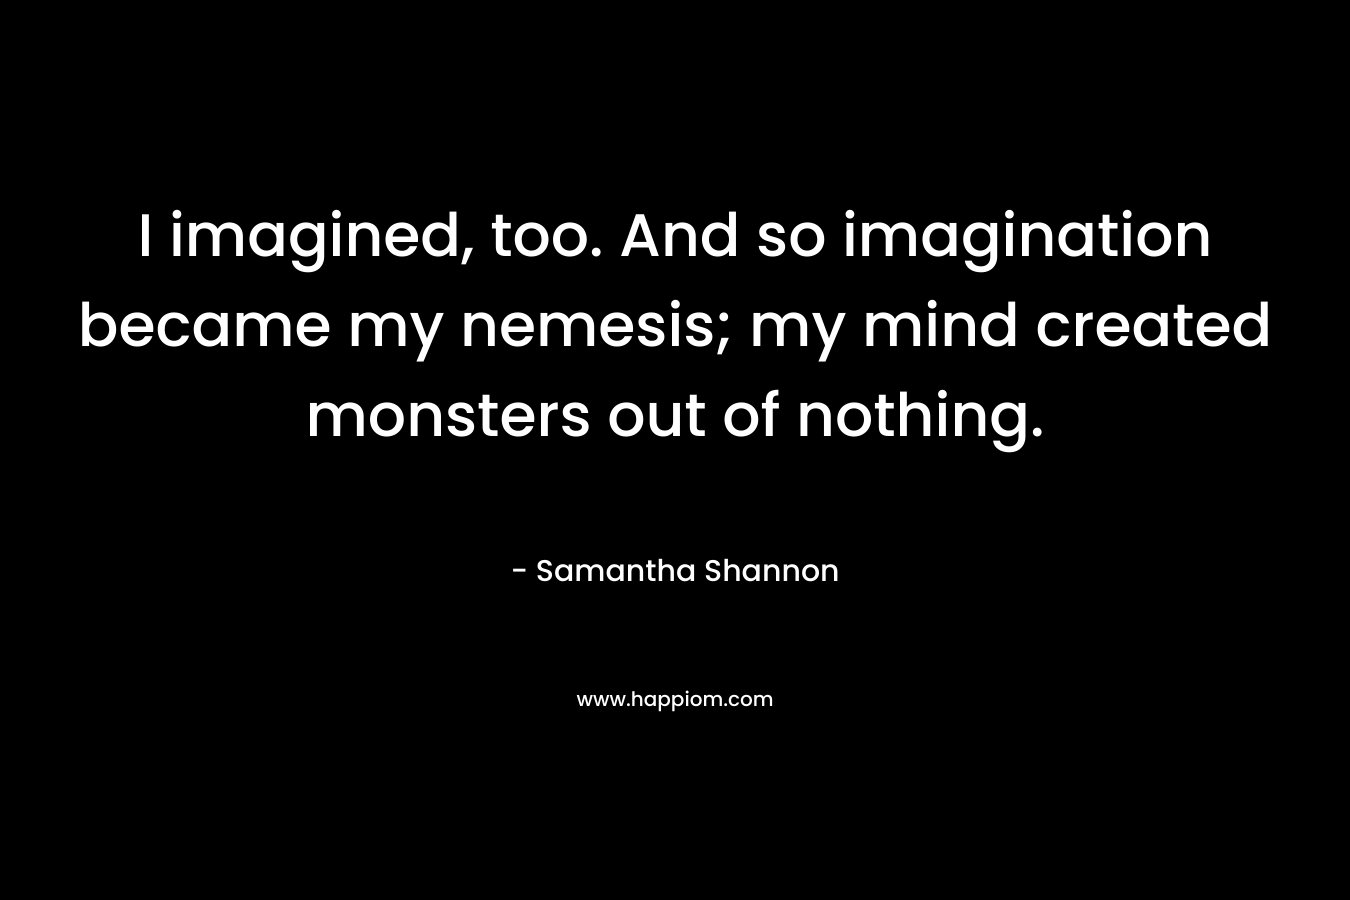 I imagined, too. And so imagination became my nemesis; my mind created monsters out of nothing.